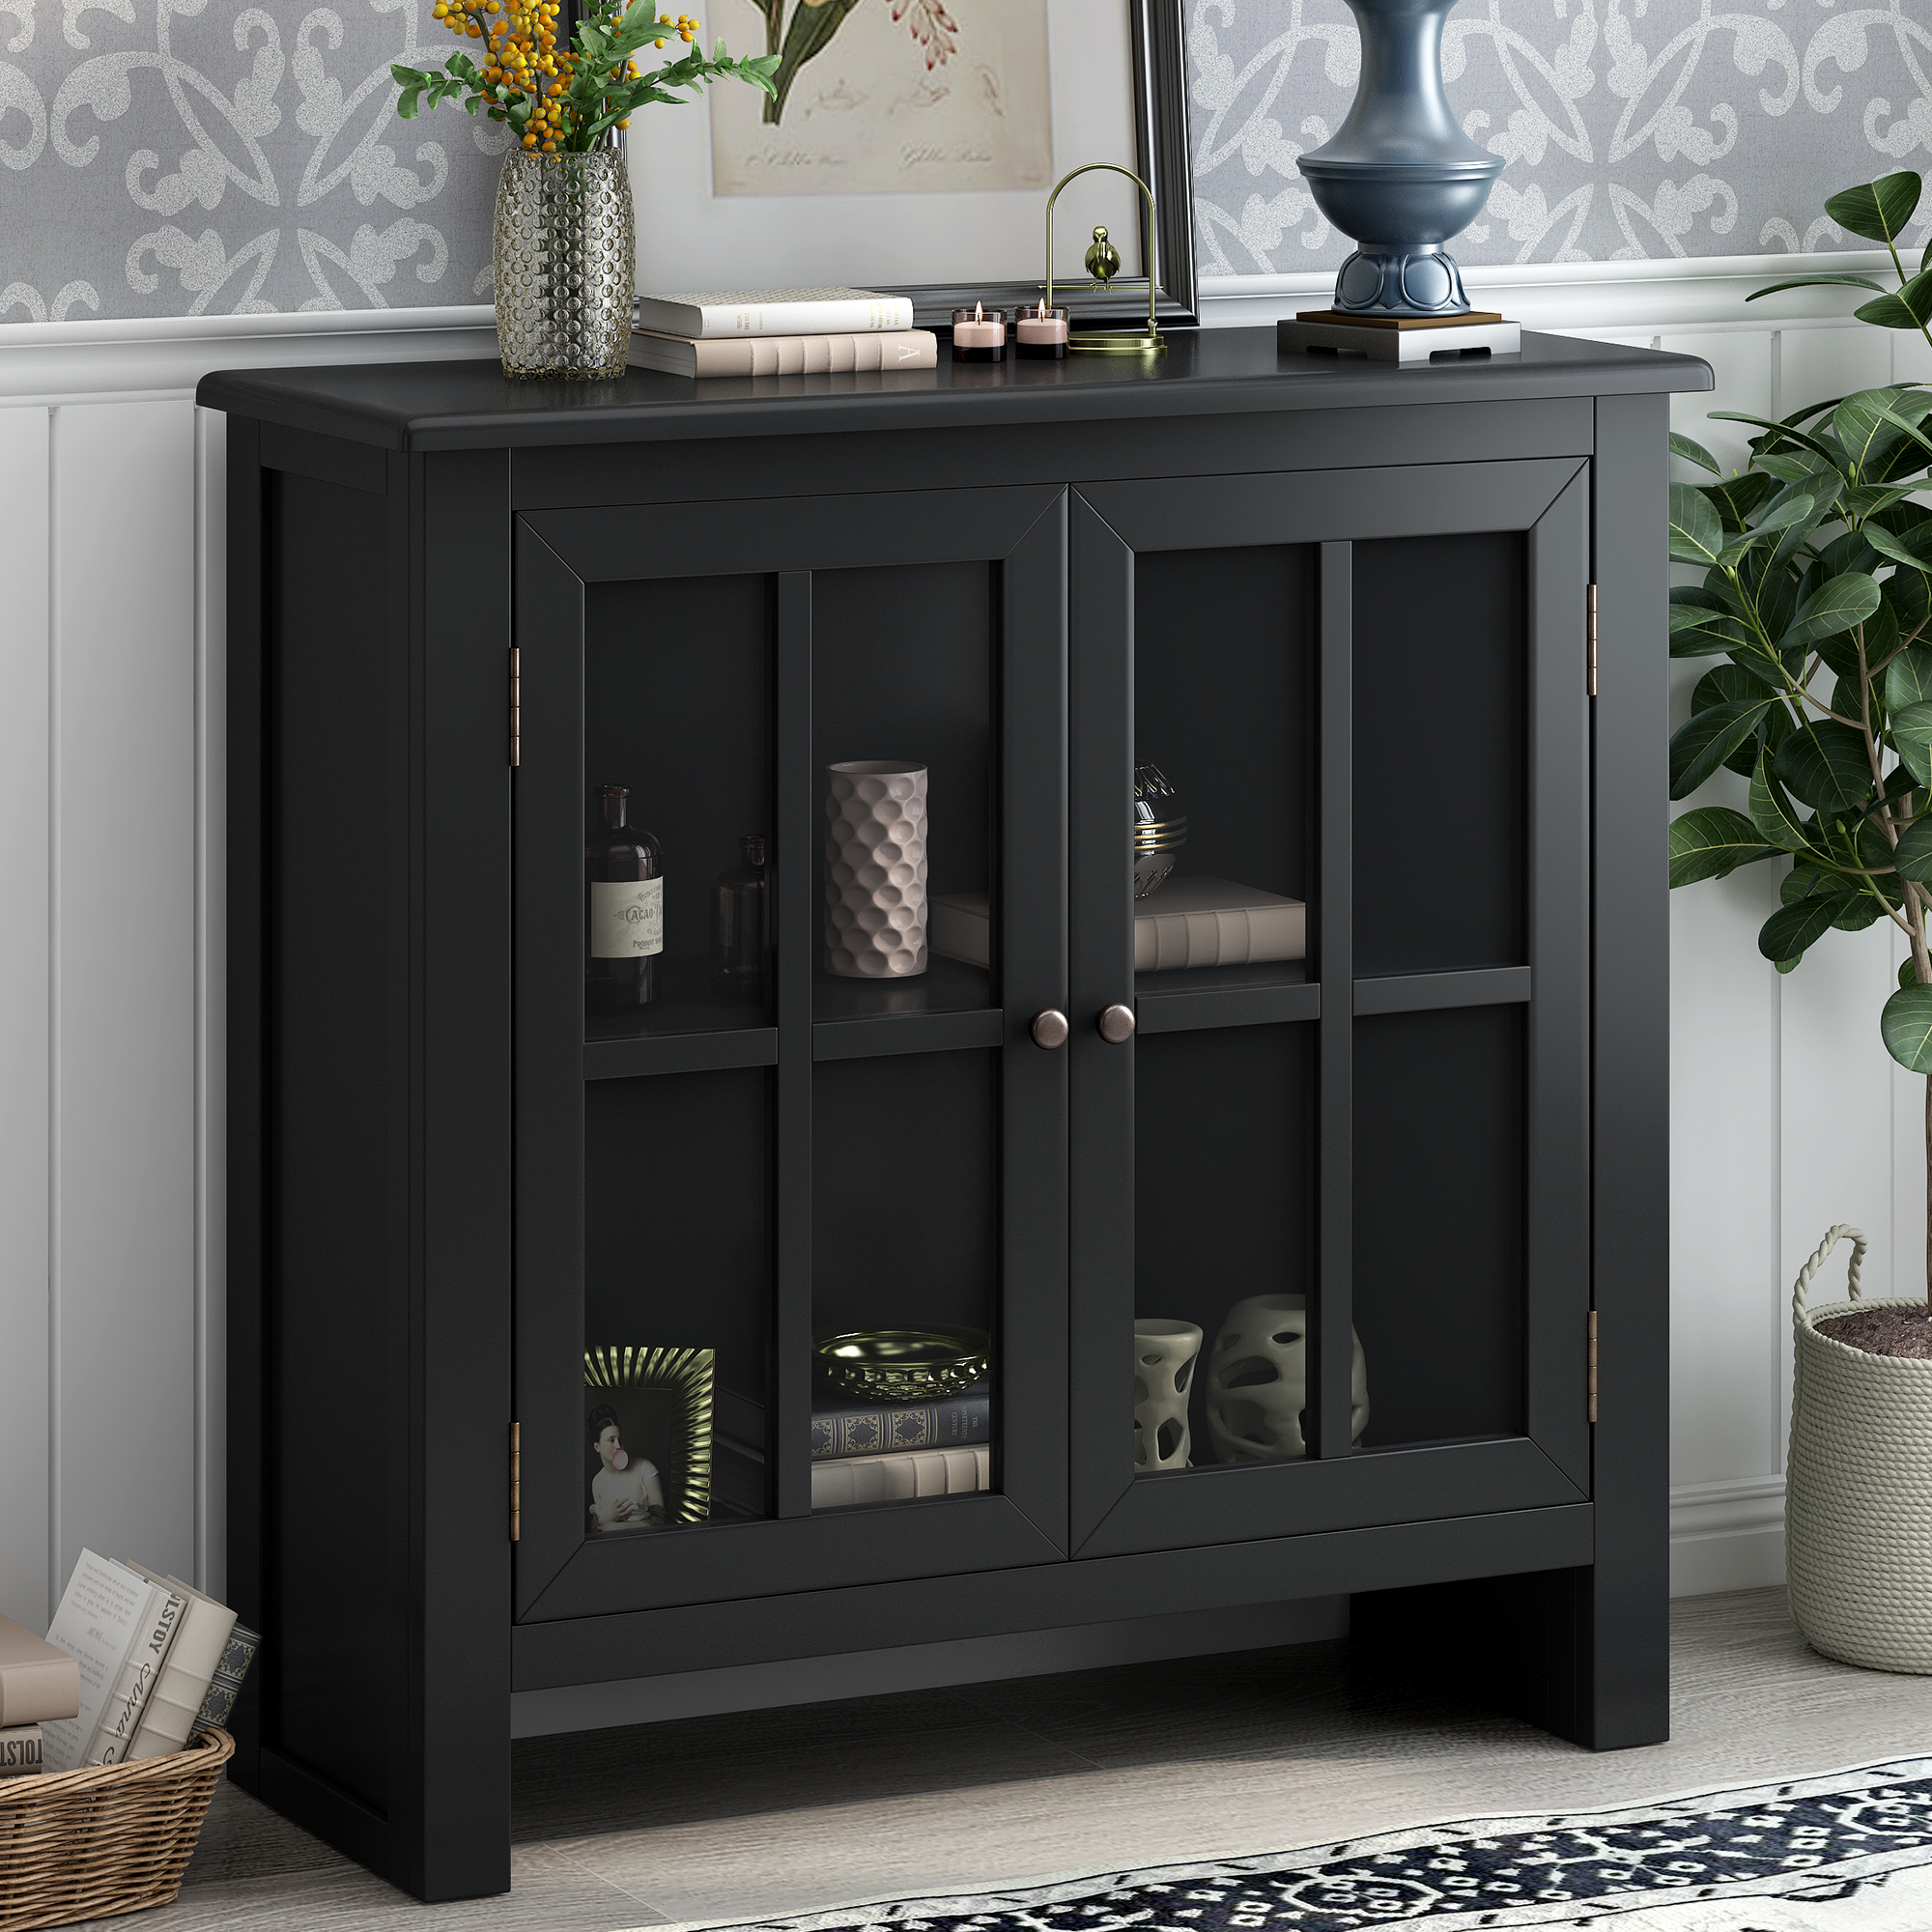 U_STYLE 31.5&rsquo;&rsquo; Wood Accent Buffet Sideboard Storage Cabinet with Doors and Adjustable Shelf